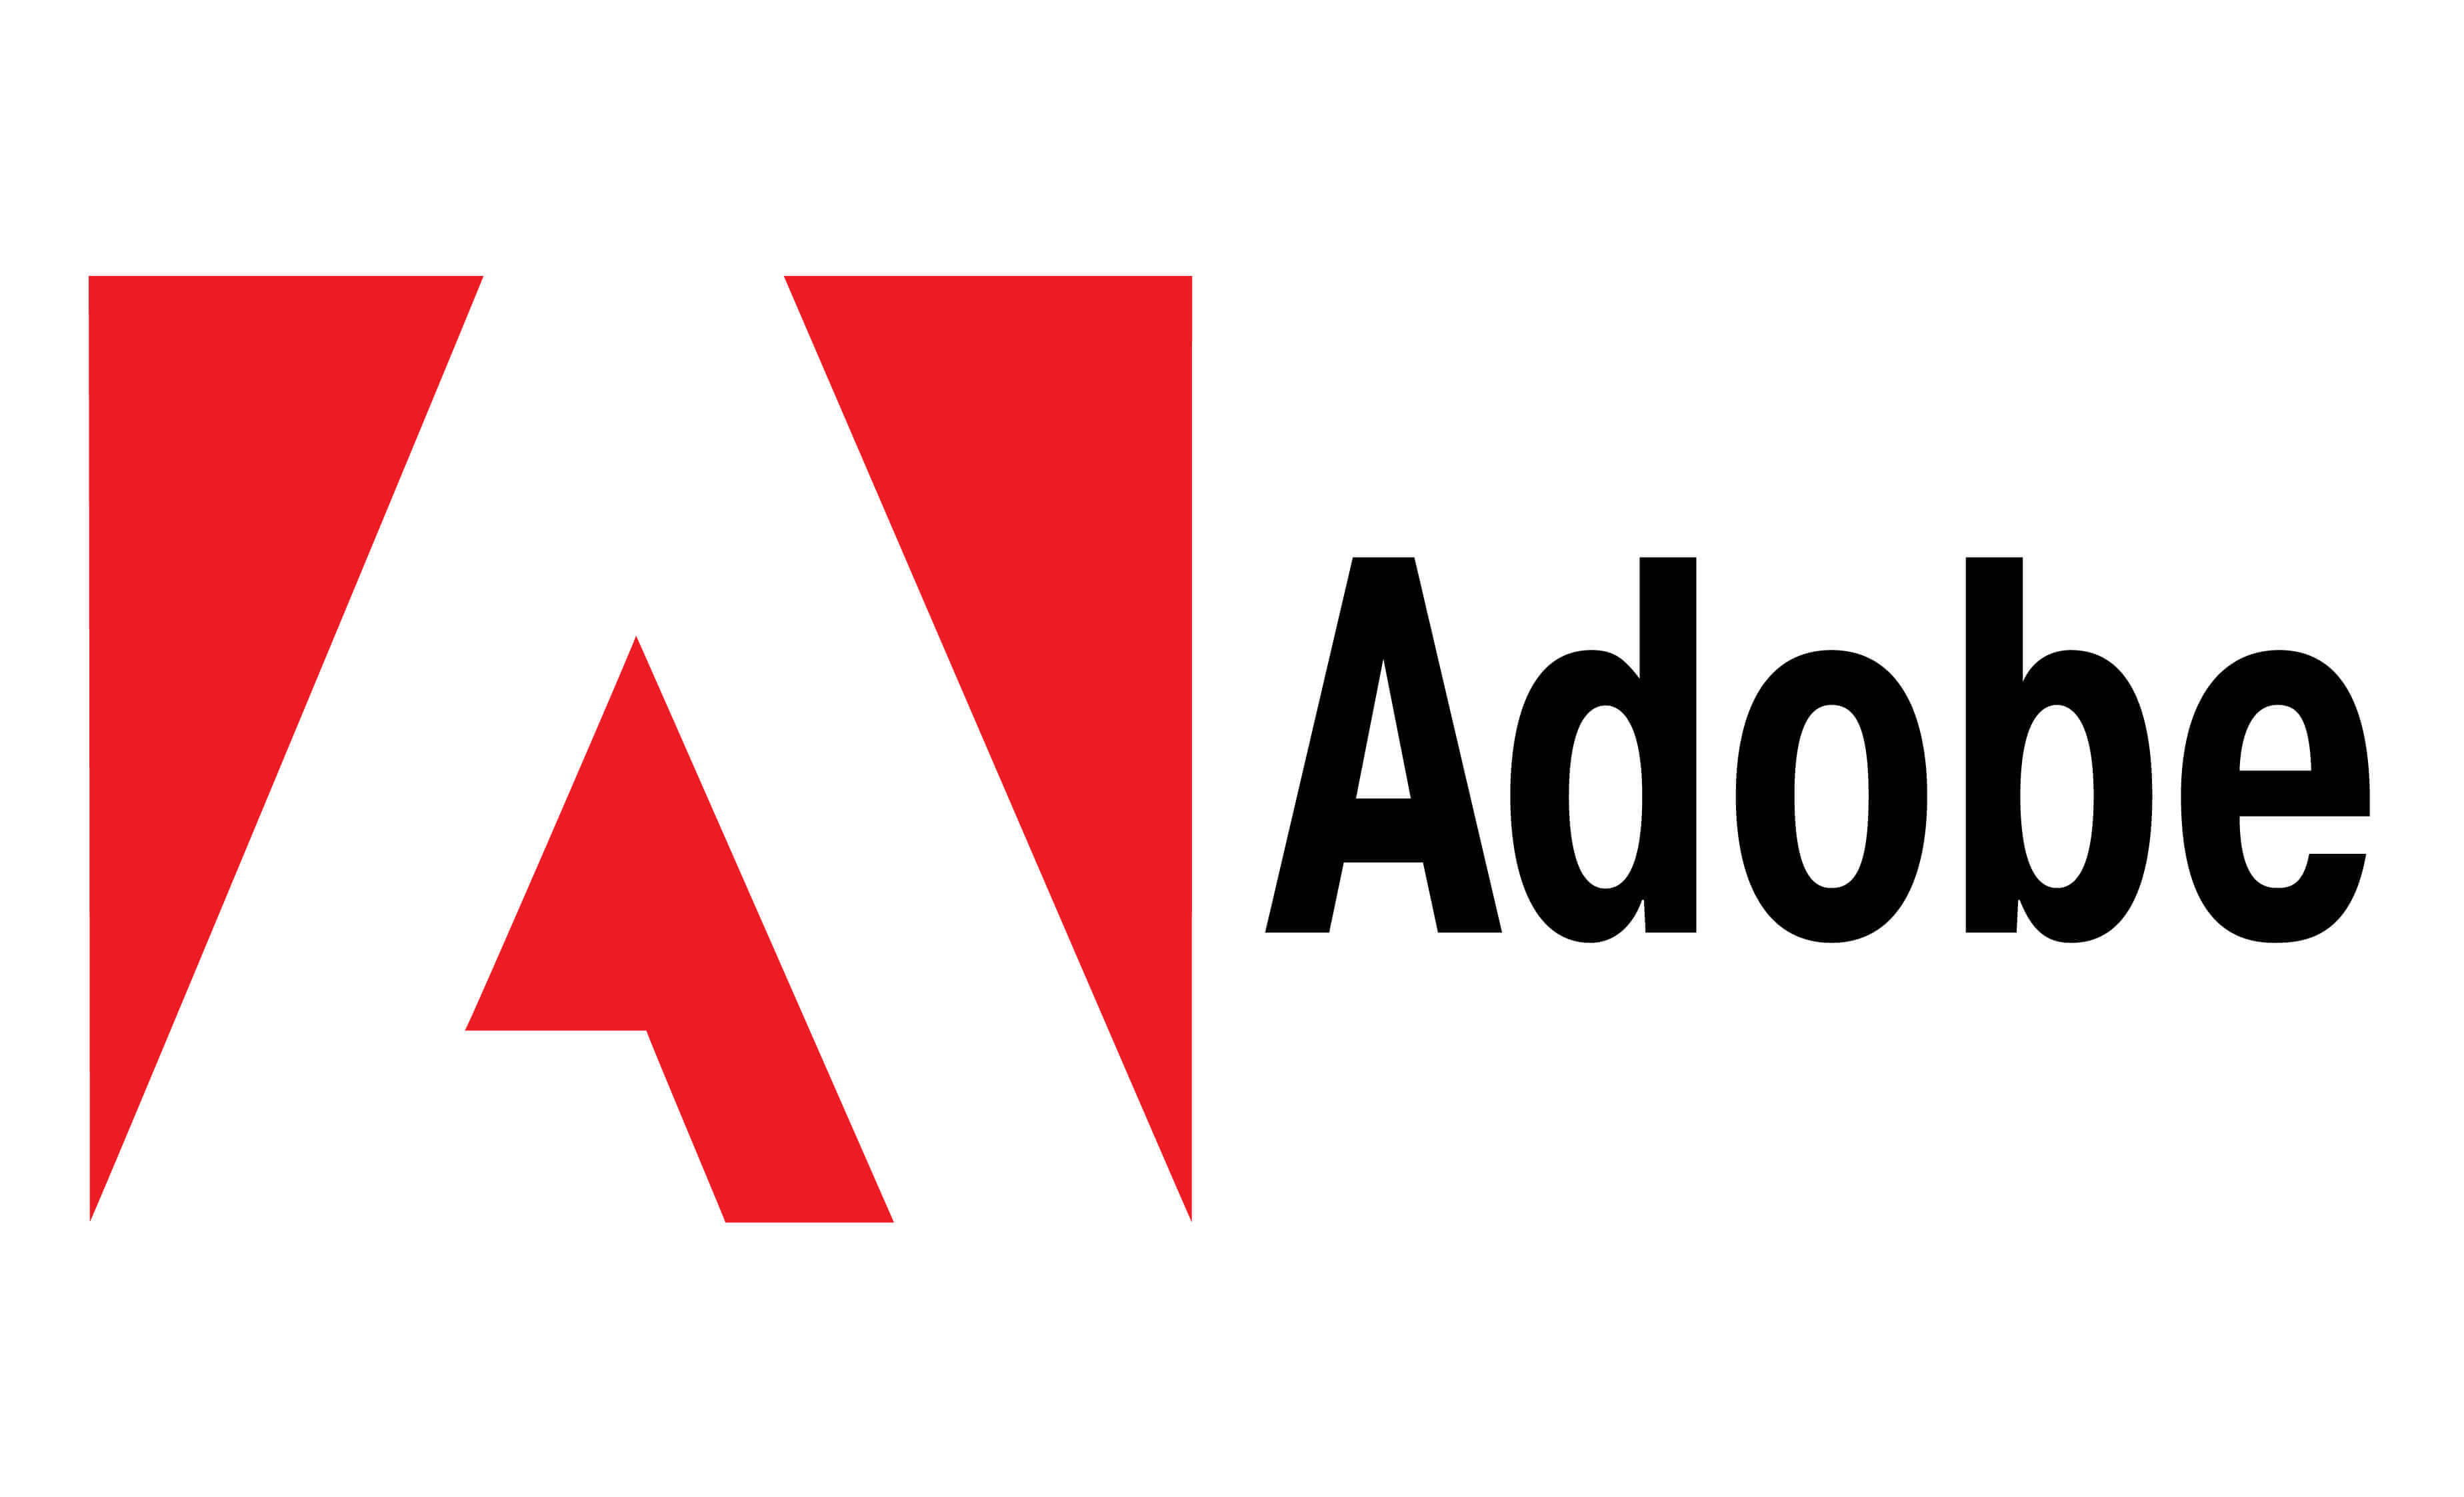 Get Adobe for a free download